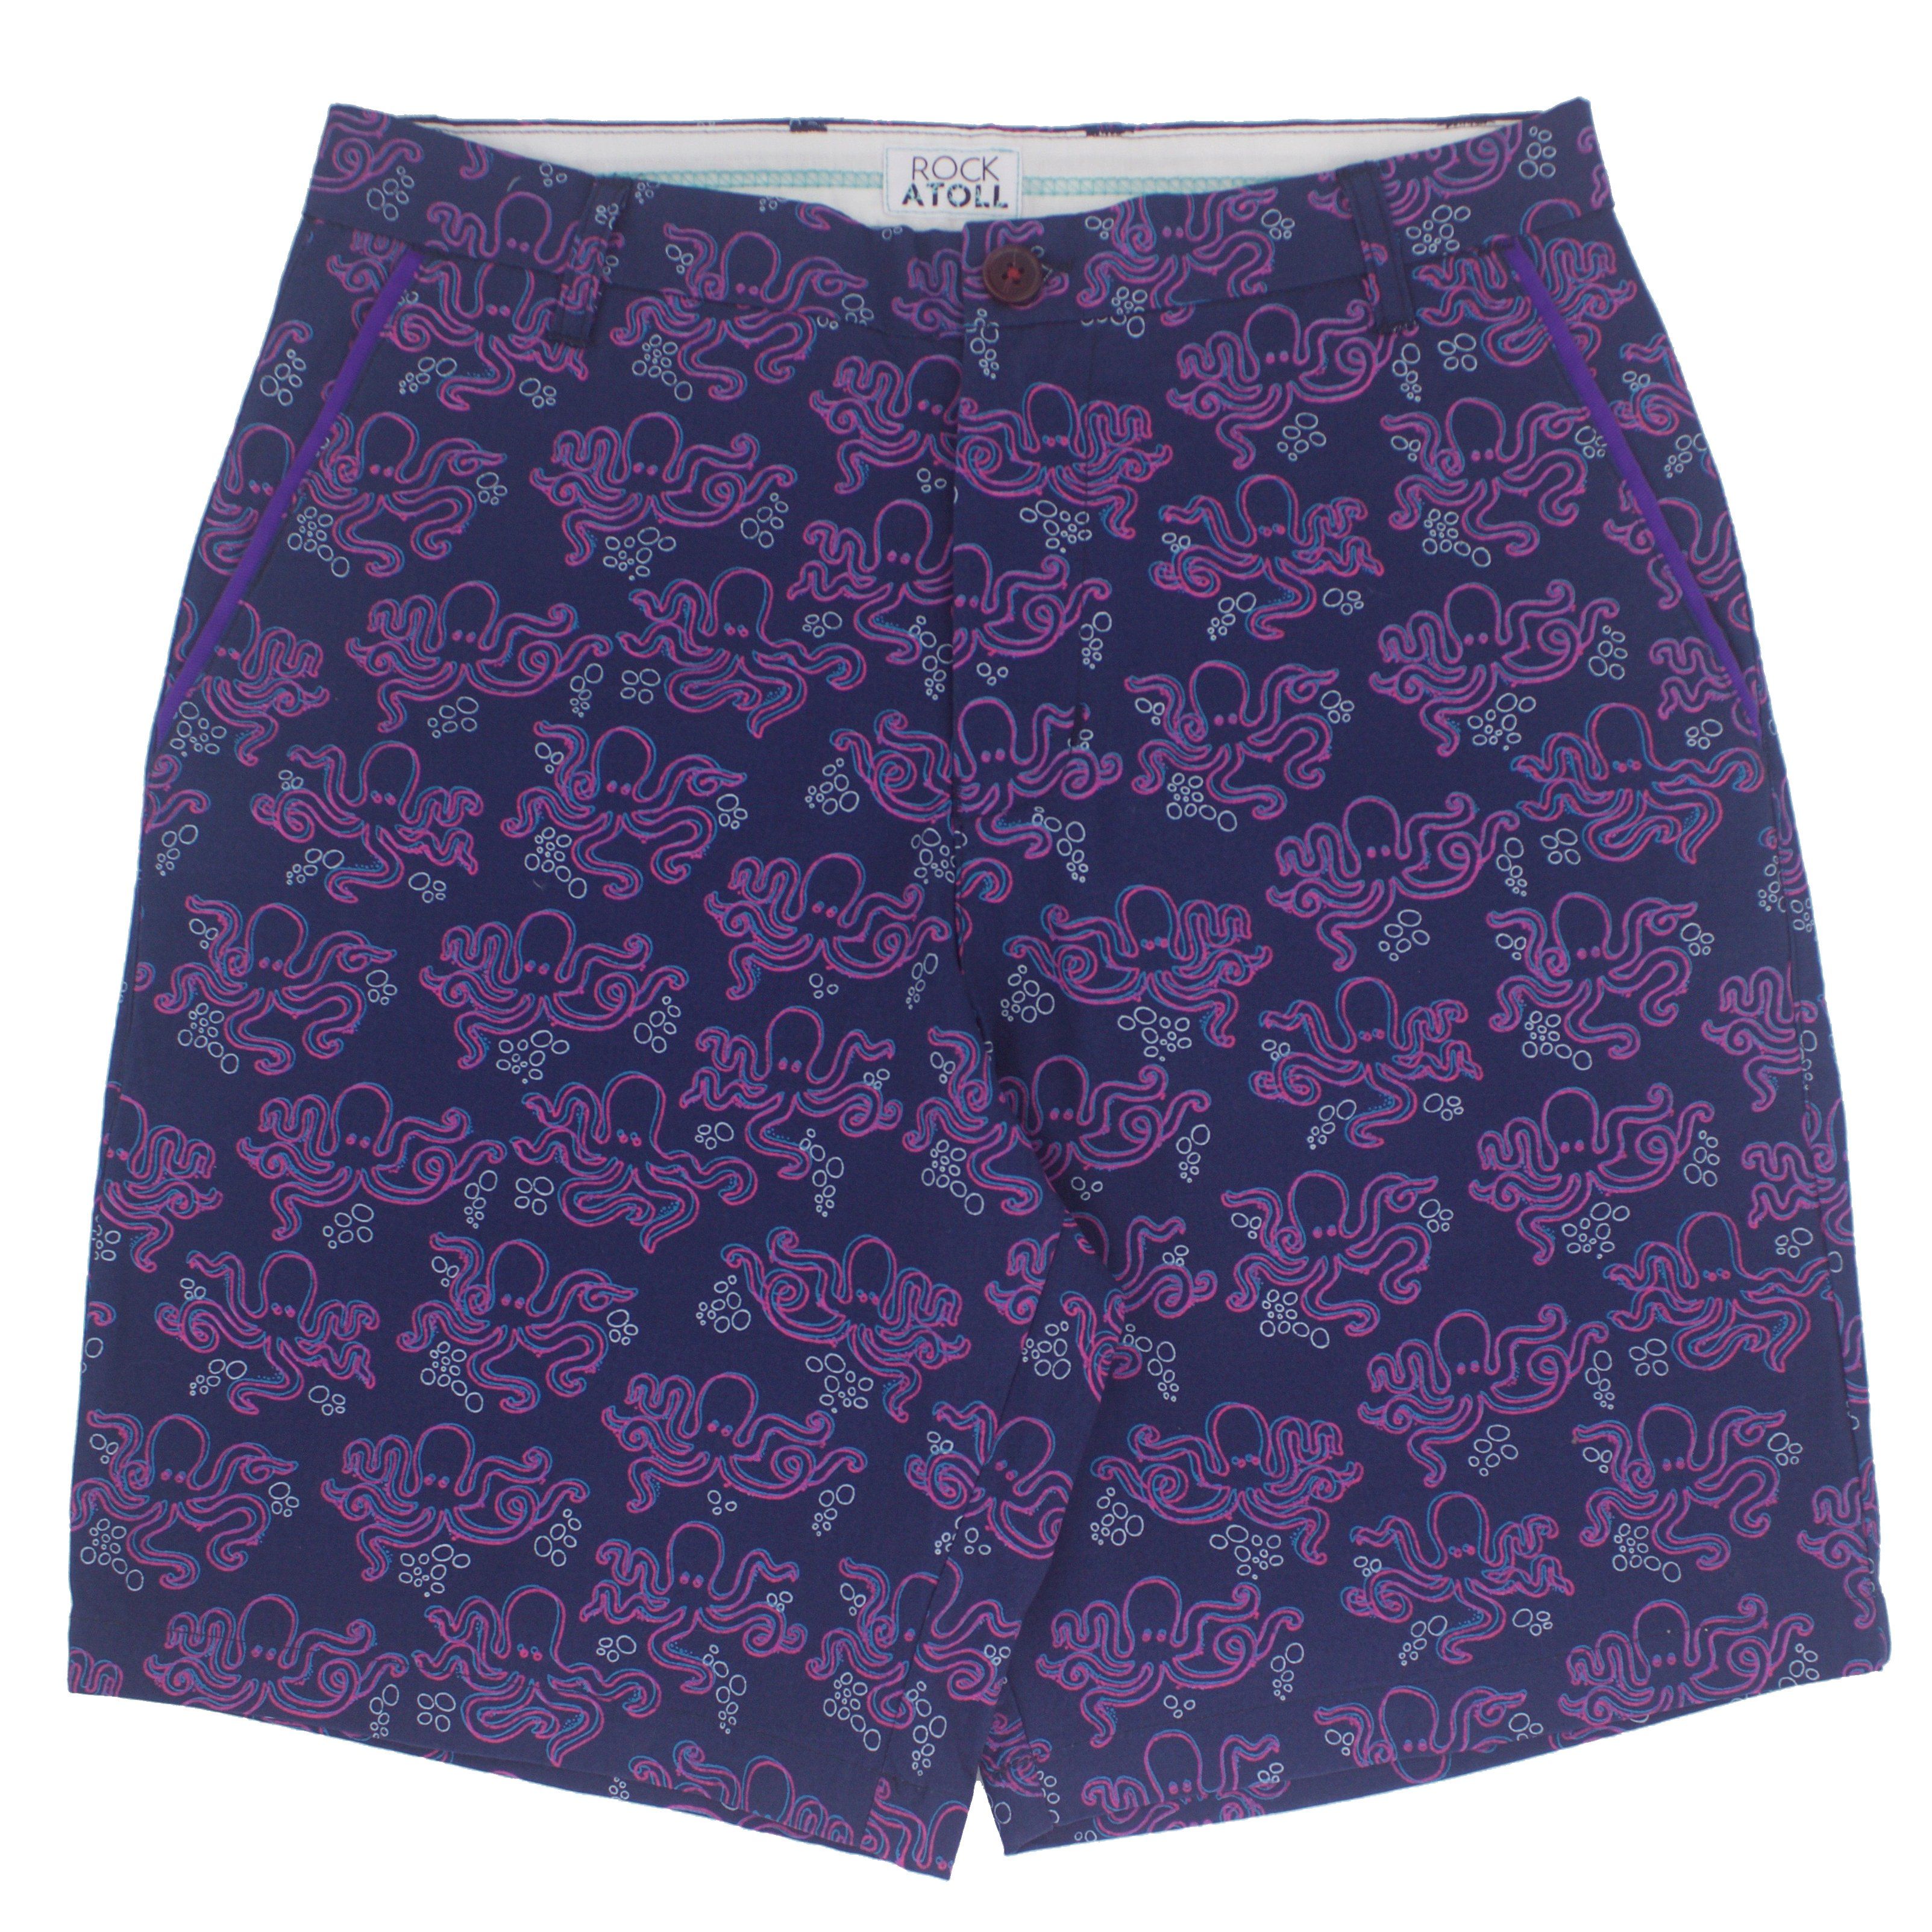 Octopus All Over Print Cotton Shorts for Men Casual Wear